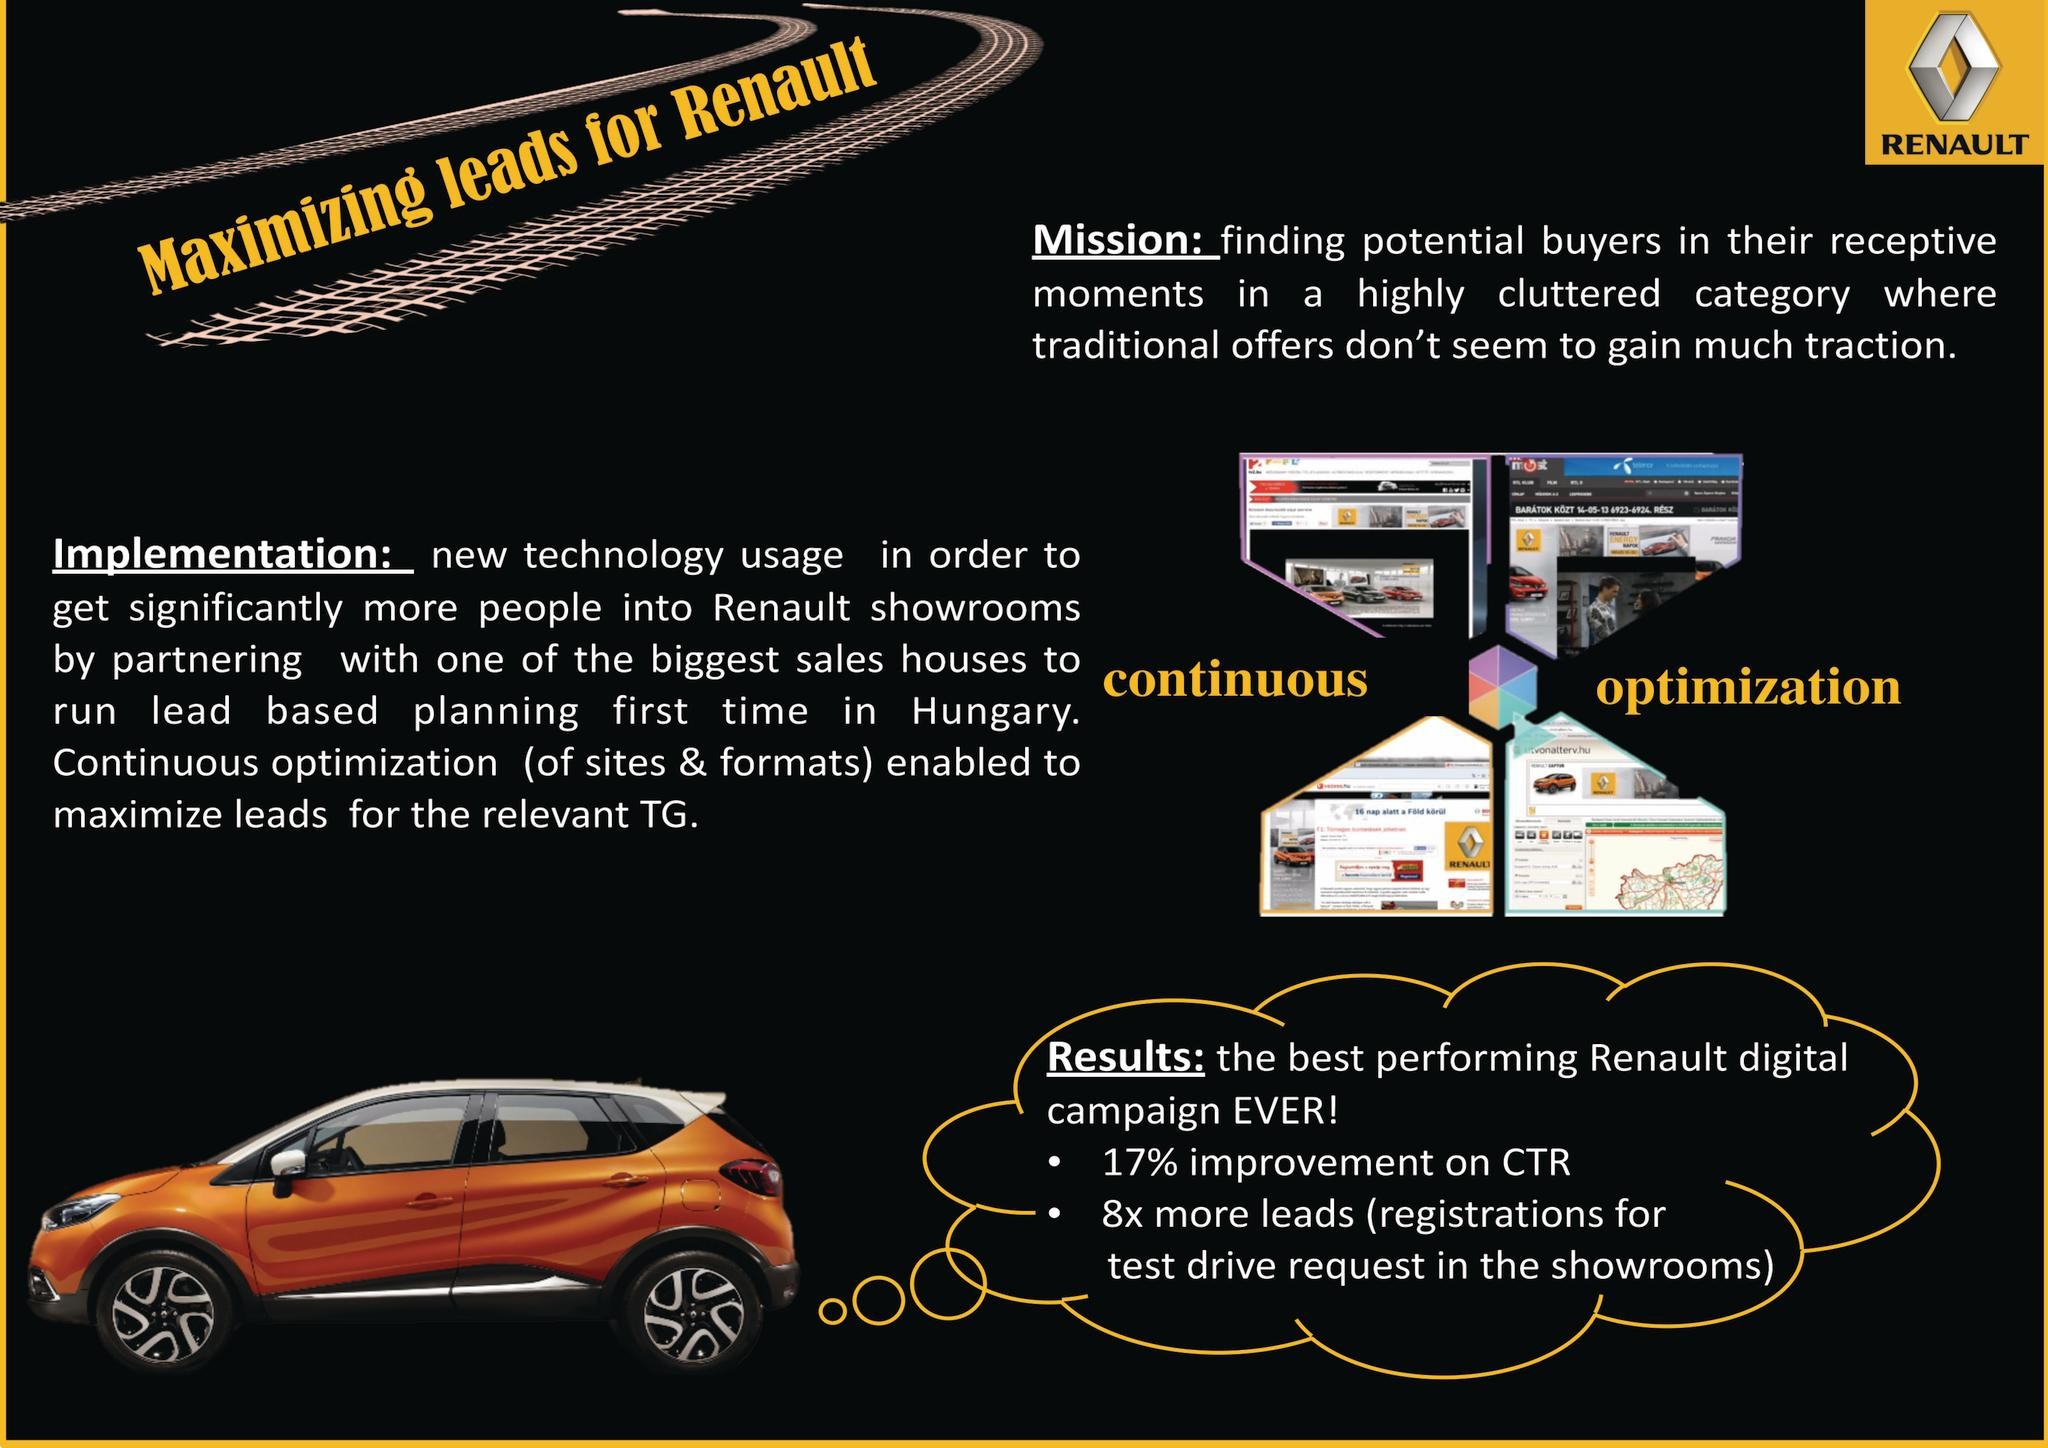 MAXIMIZING LEADS FOR RENAULT